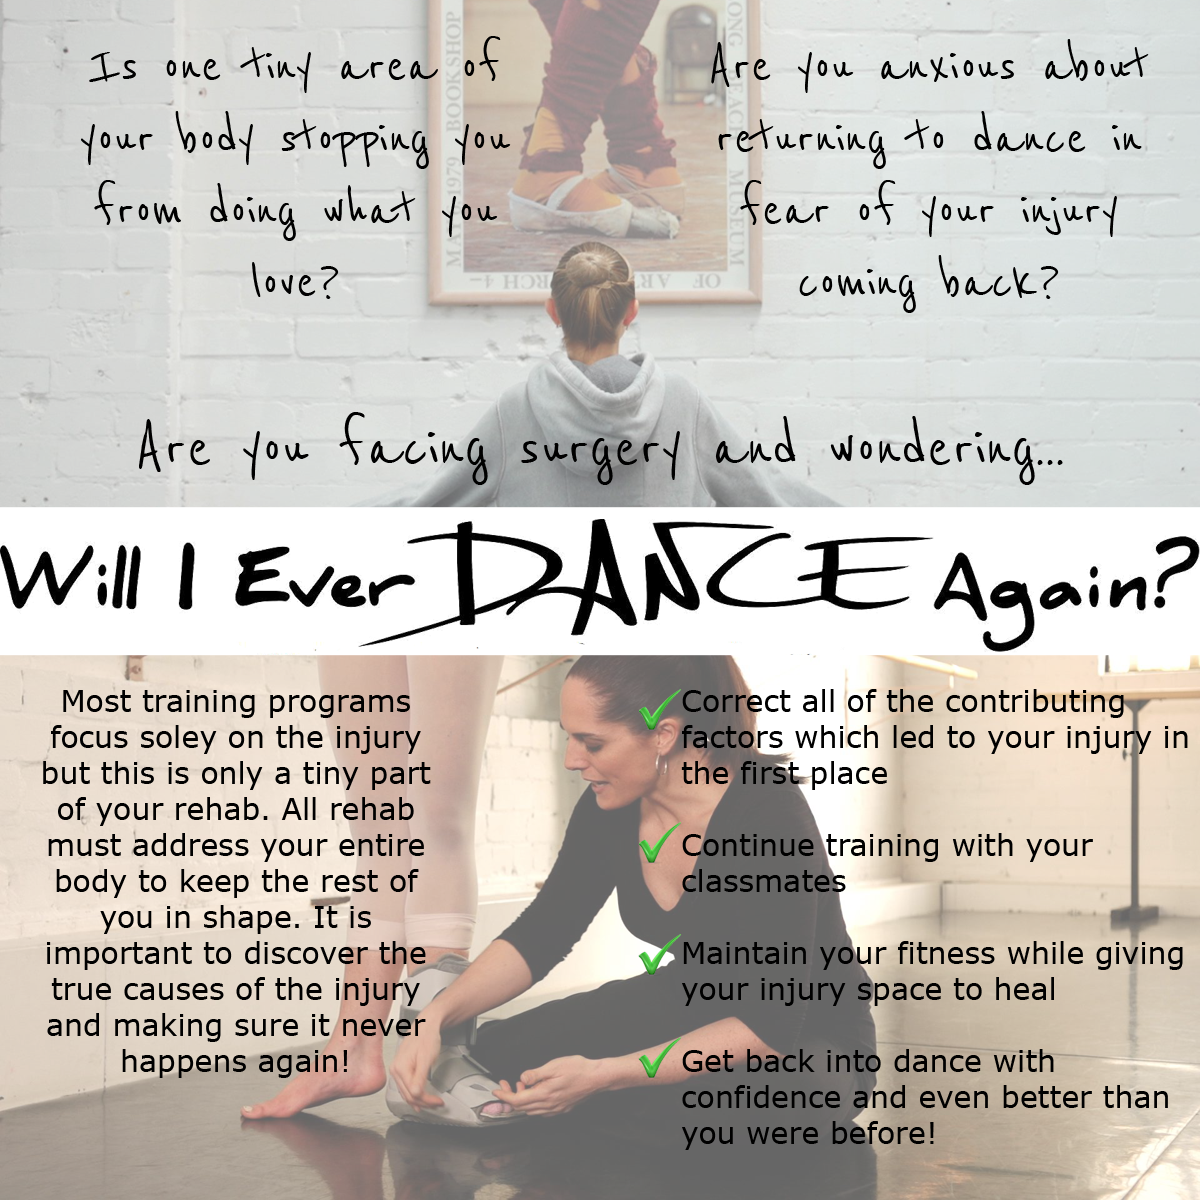 Will I Ever Dance Again?